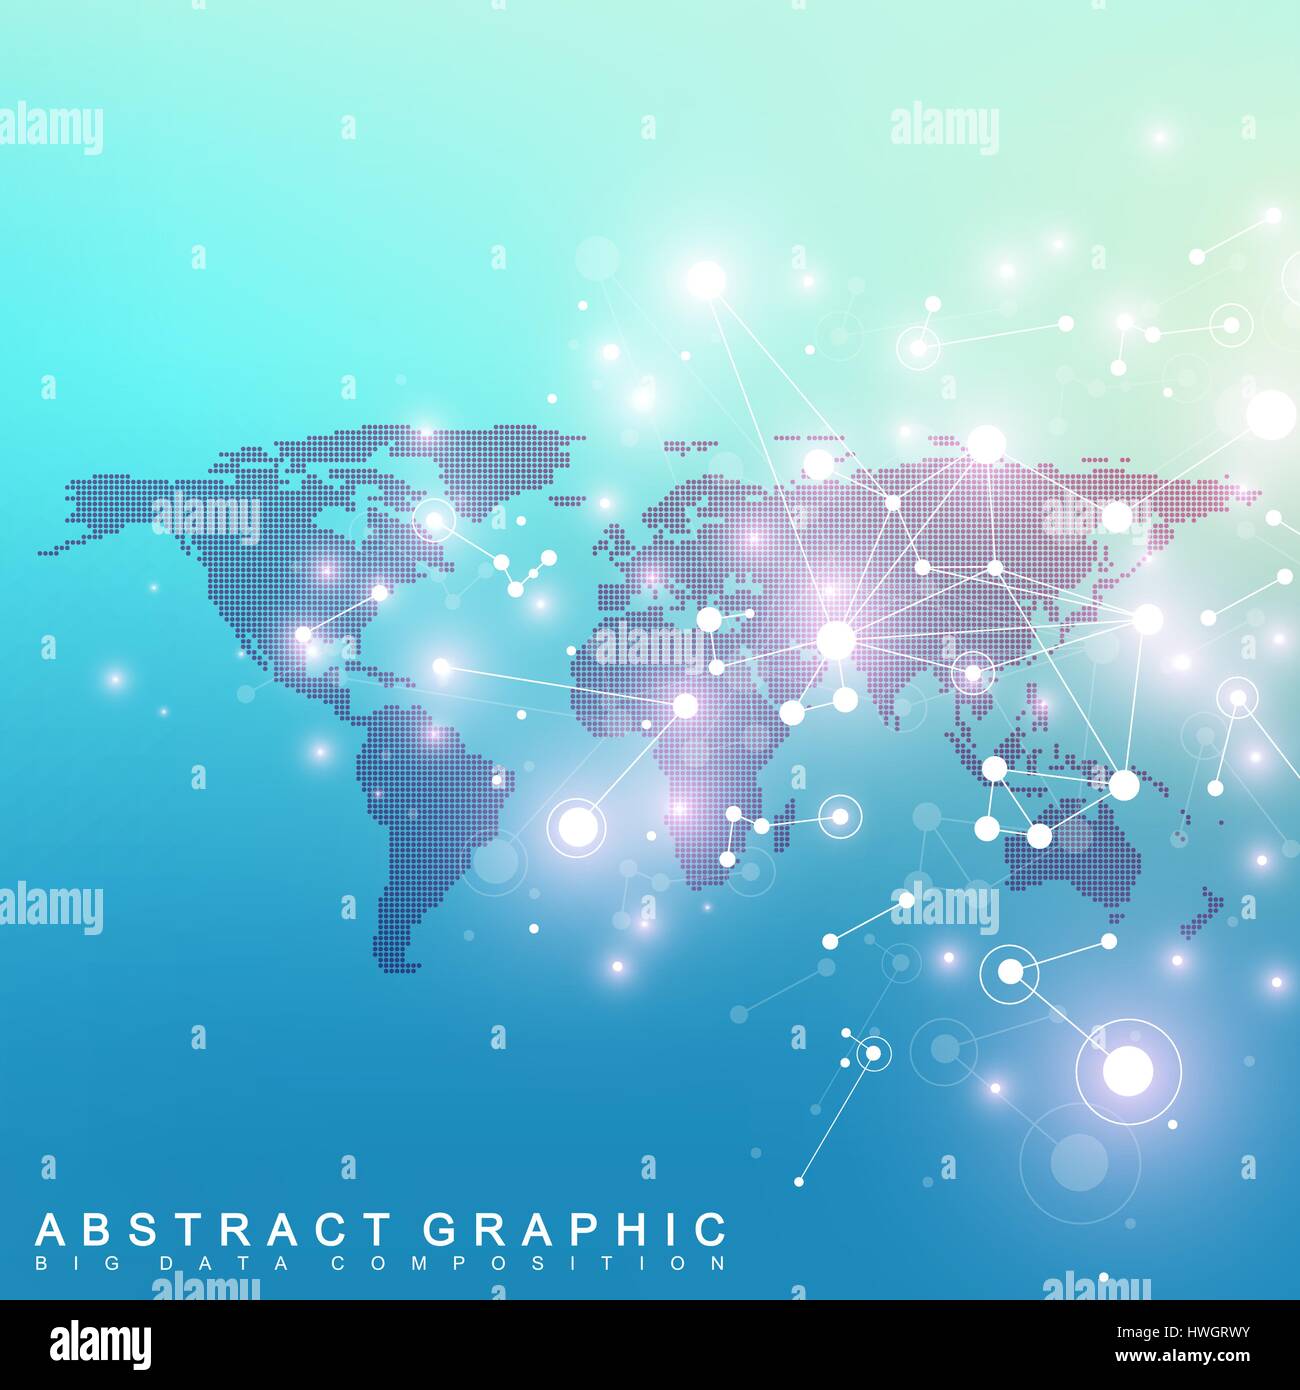 Geometric graphic background communication with dotted World Map. Big data complex. Particle compounds. Network connection, lines plexus. Minimalistic chaotic design, vector illustration. Stock Vector